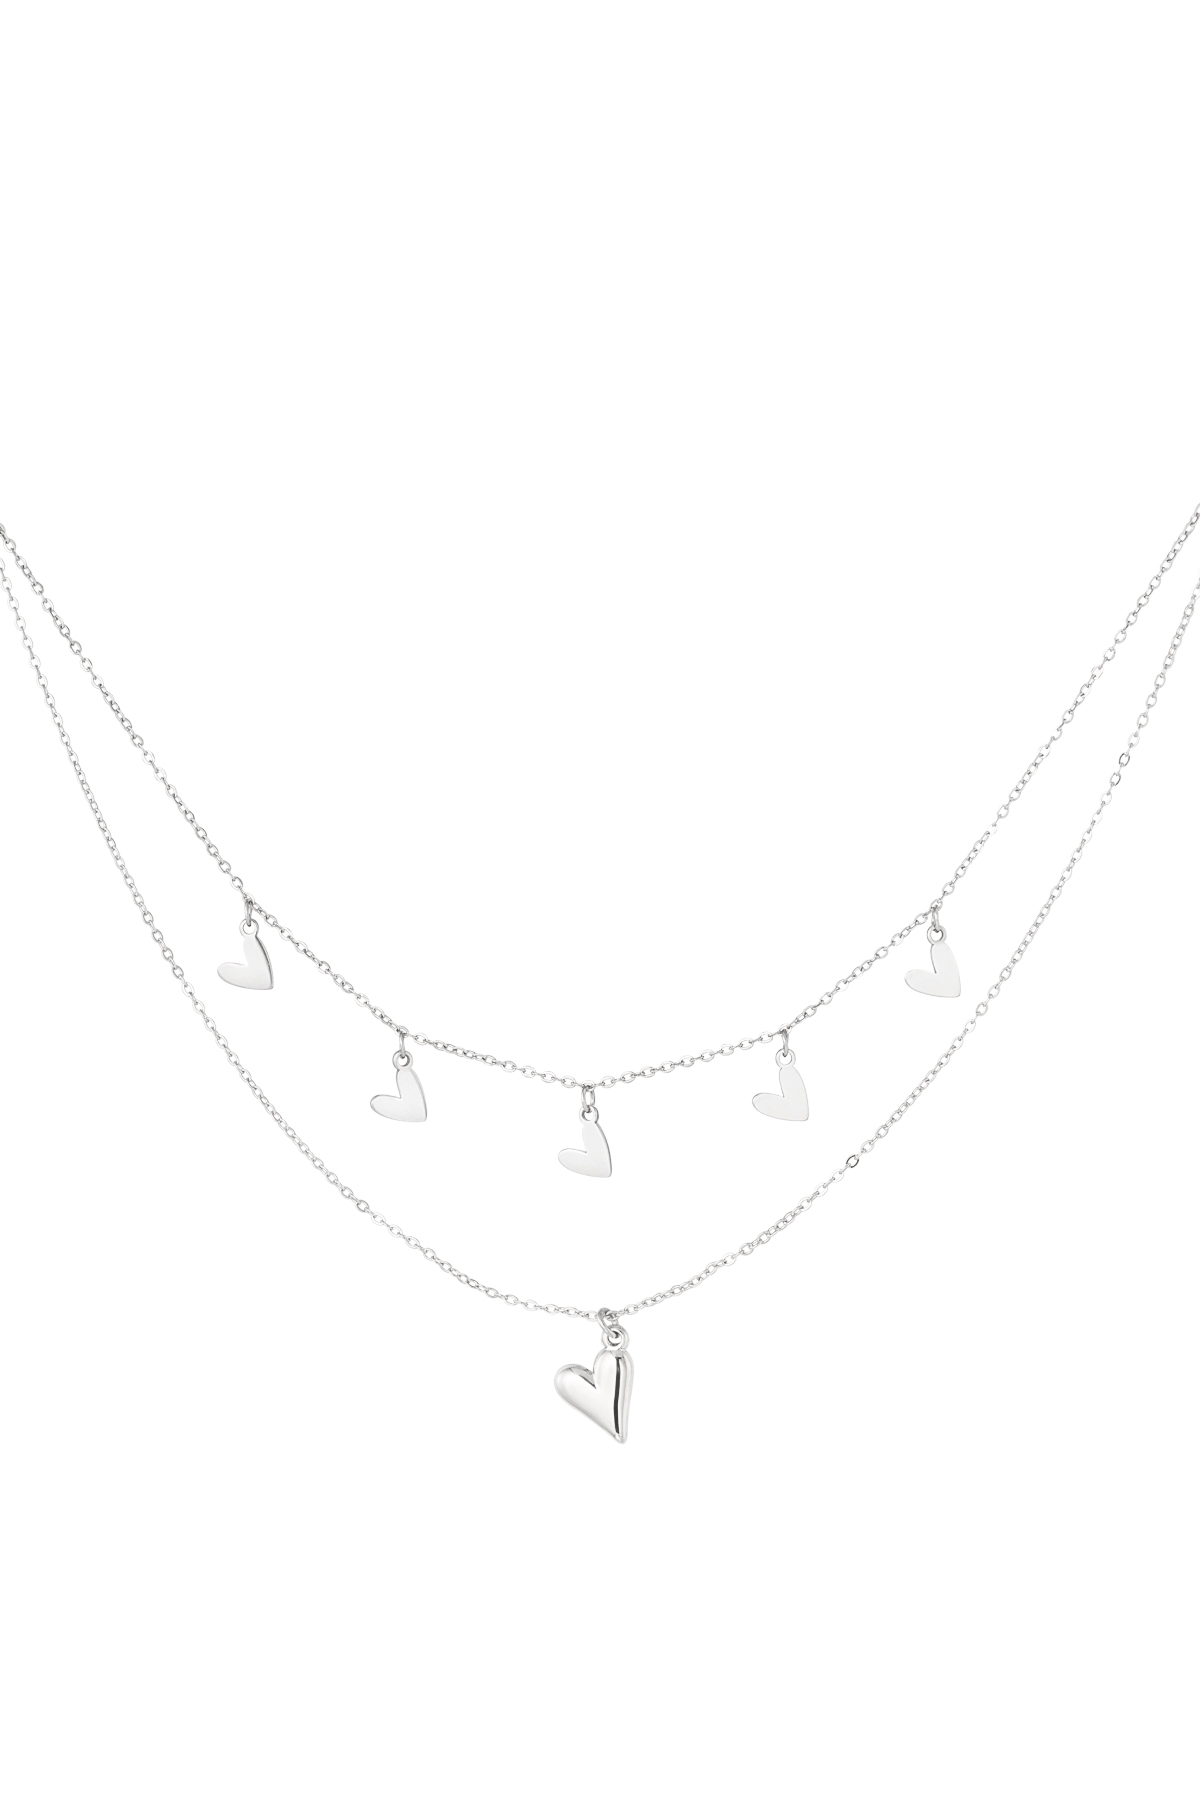 Double heart necklace - silver